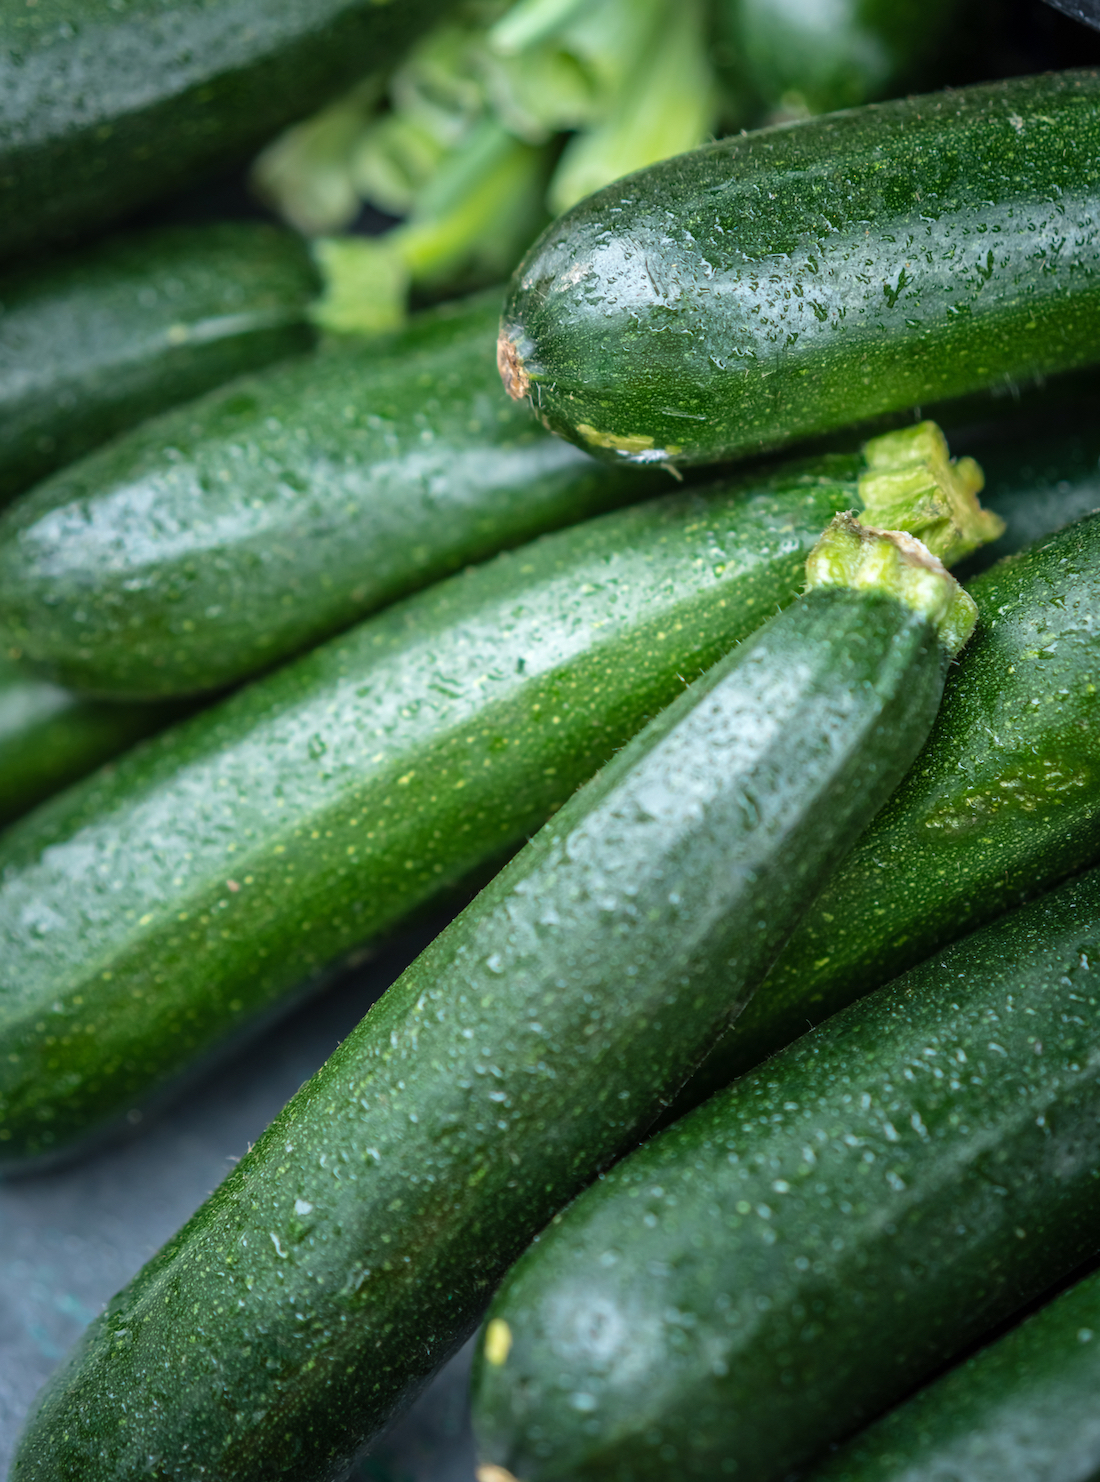 Courgettes ©aaabbbccc shutterstock